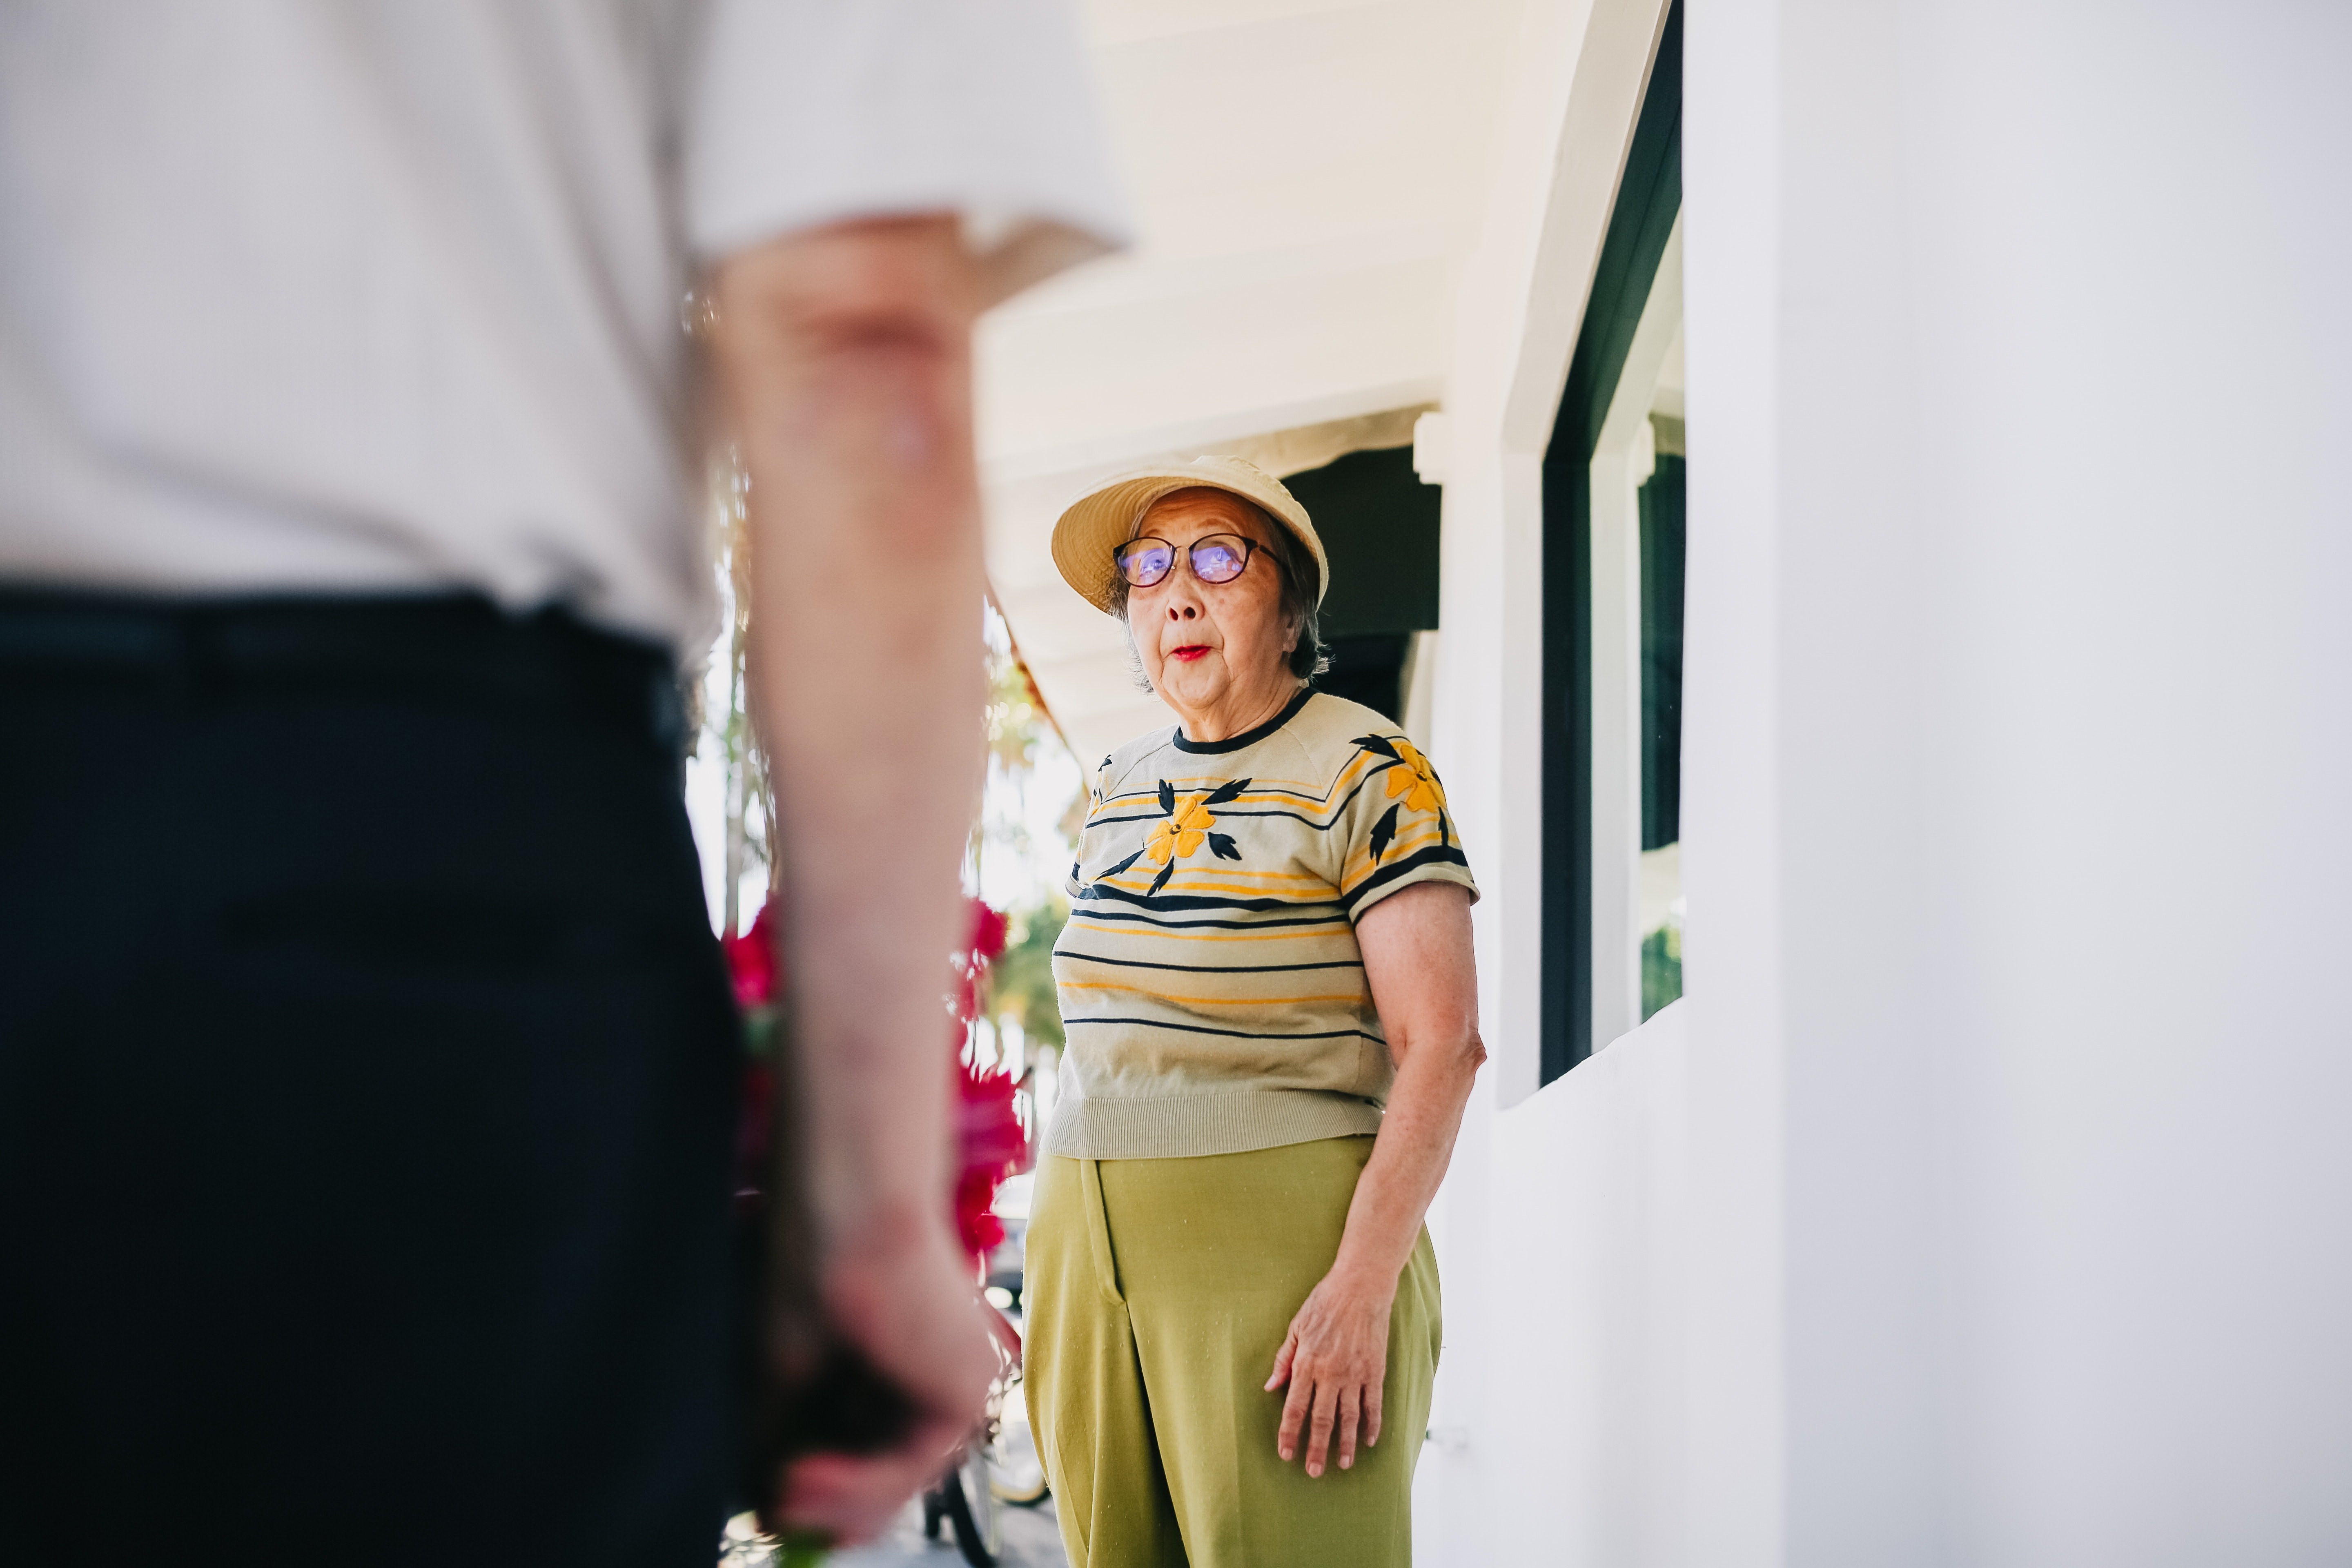 Grandma came home and found everything messed up. | Photo: Pexels/RODNAE Productions